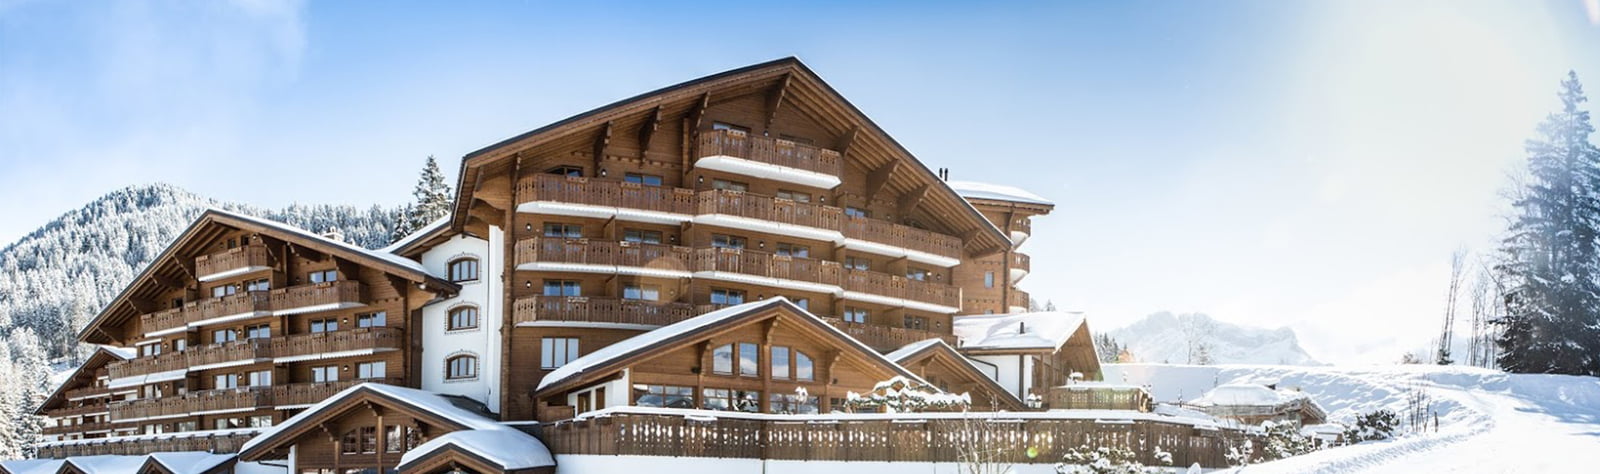 Ski Packages & Deals, Lodging Packages